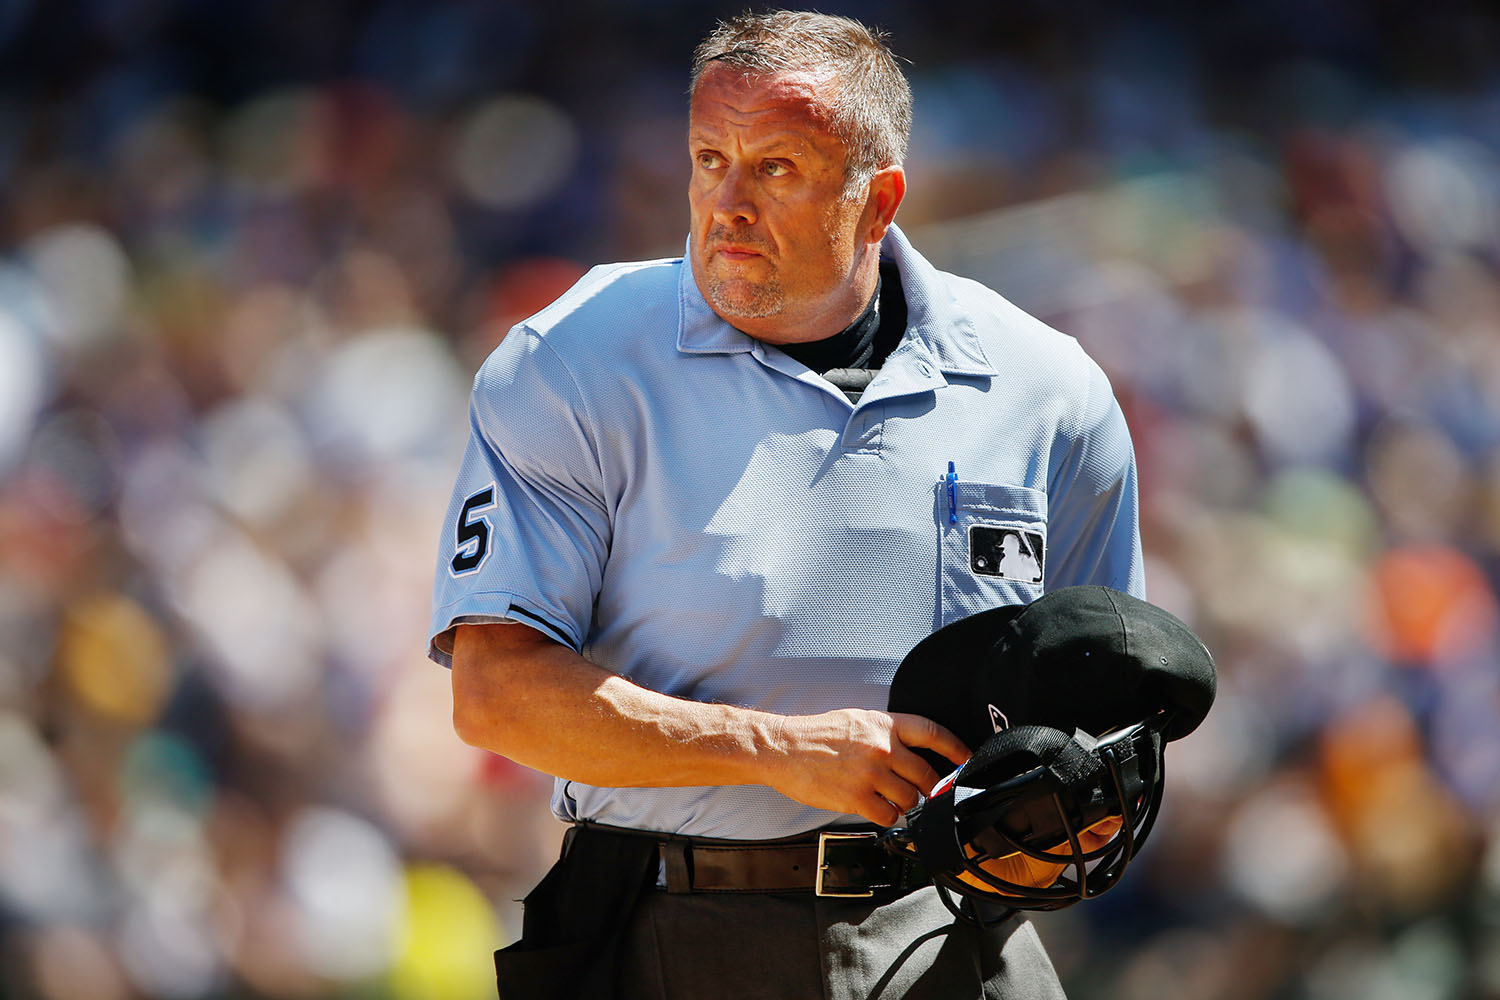 The first openly gay Major League Baseball umpire reflects on